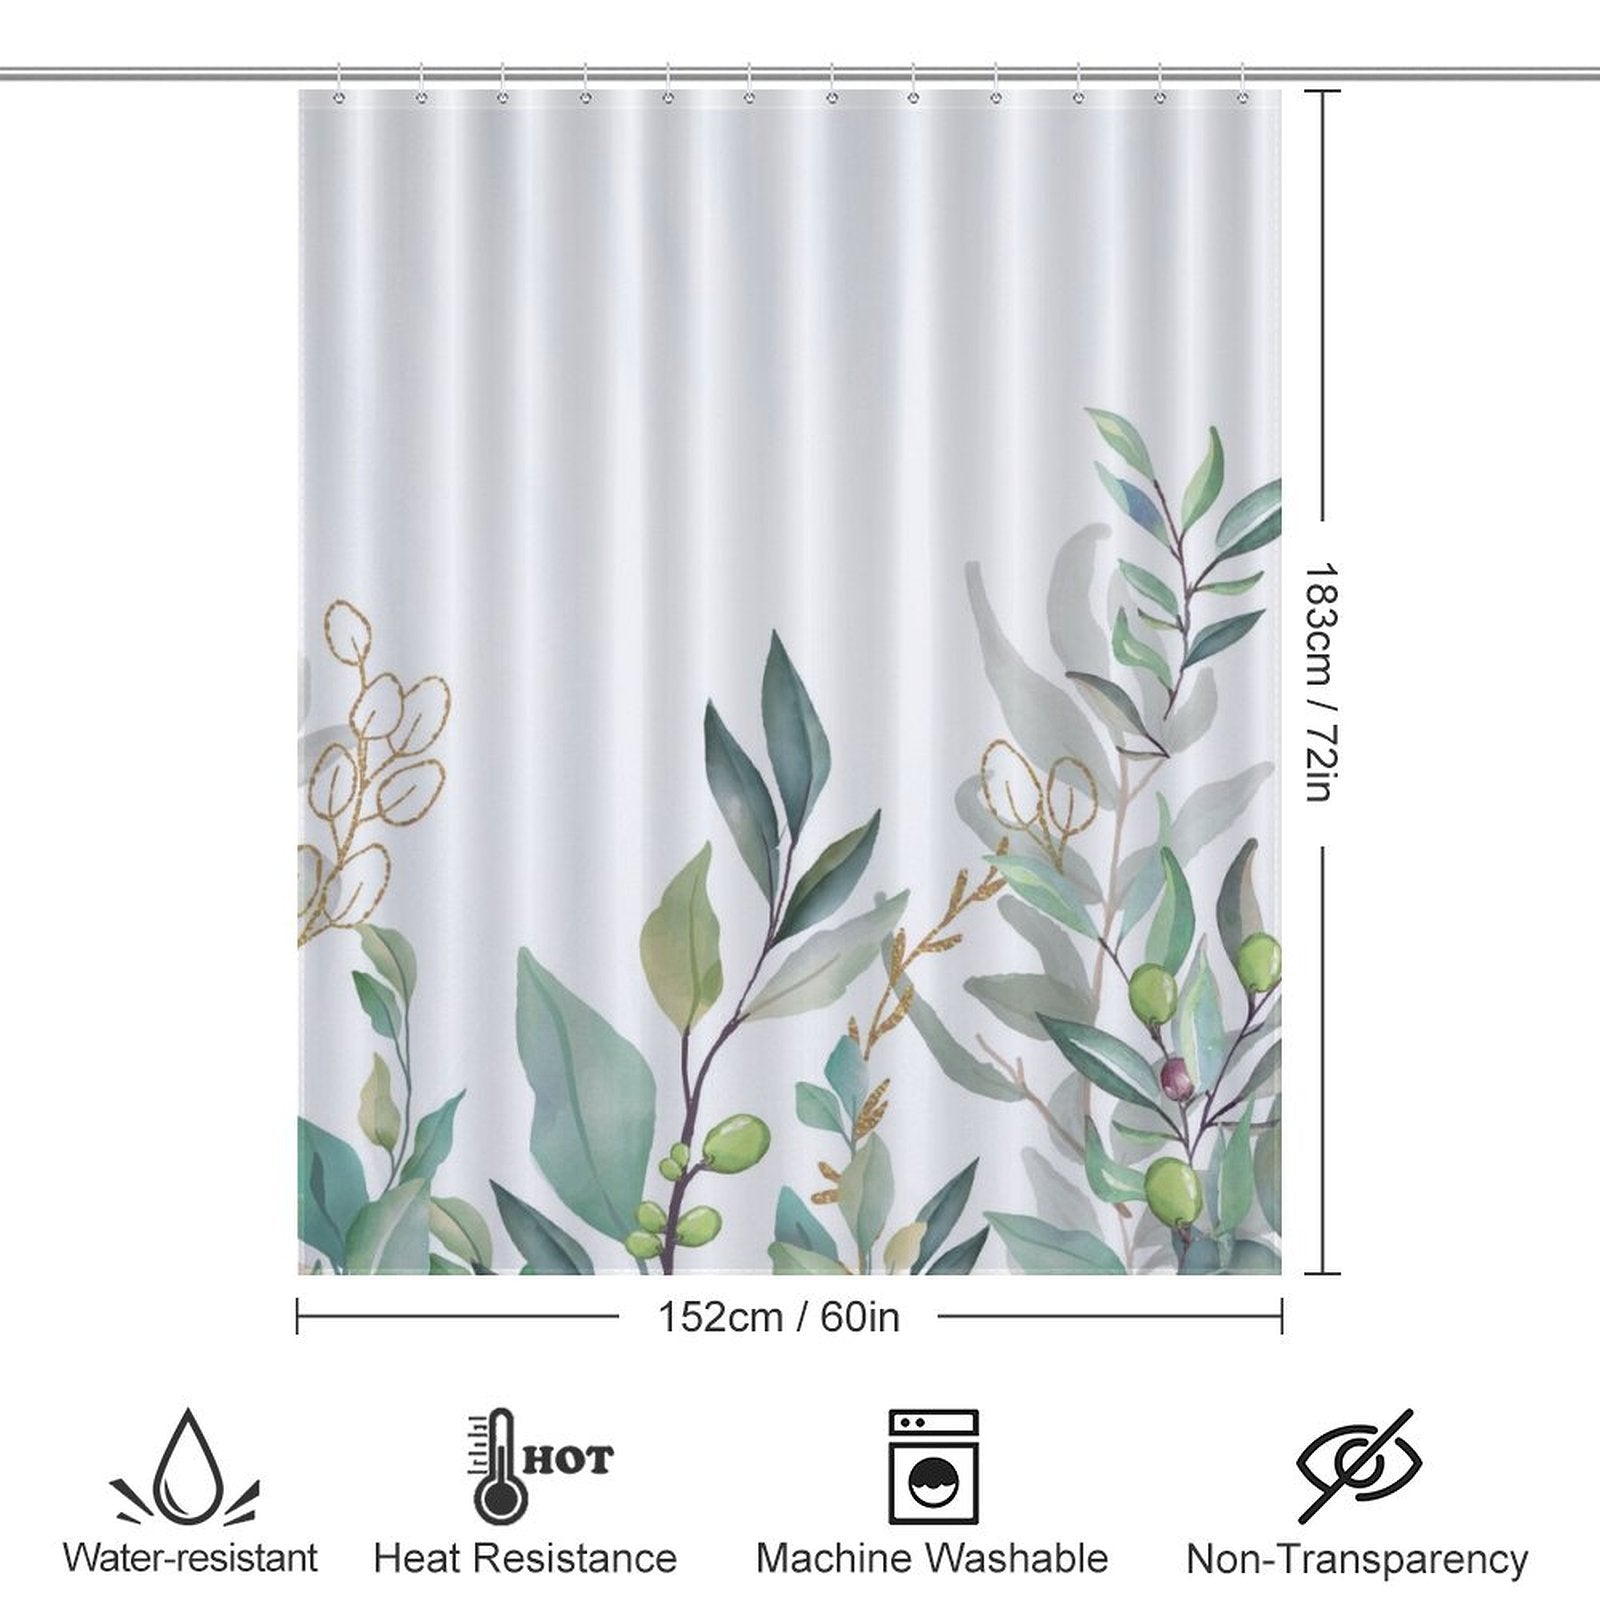 Cotton Cat Watercolor Sage Green Eucalyptus Botanical Leaves Shower Curtain-Cottoncat with a botanical design featuring watercolor sage green eucalyptus leaves, dimensions of 152 cm x 183 cm (60 in x 72 in). Features include water resistance, heat resistance, machine washability, and non-transparency.